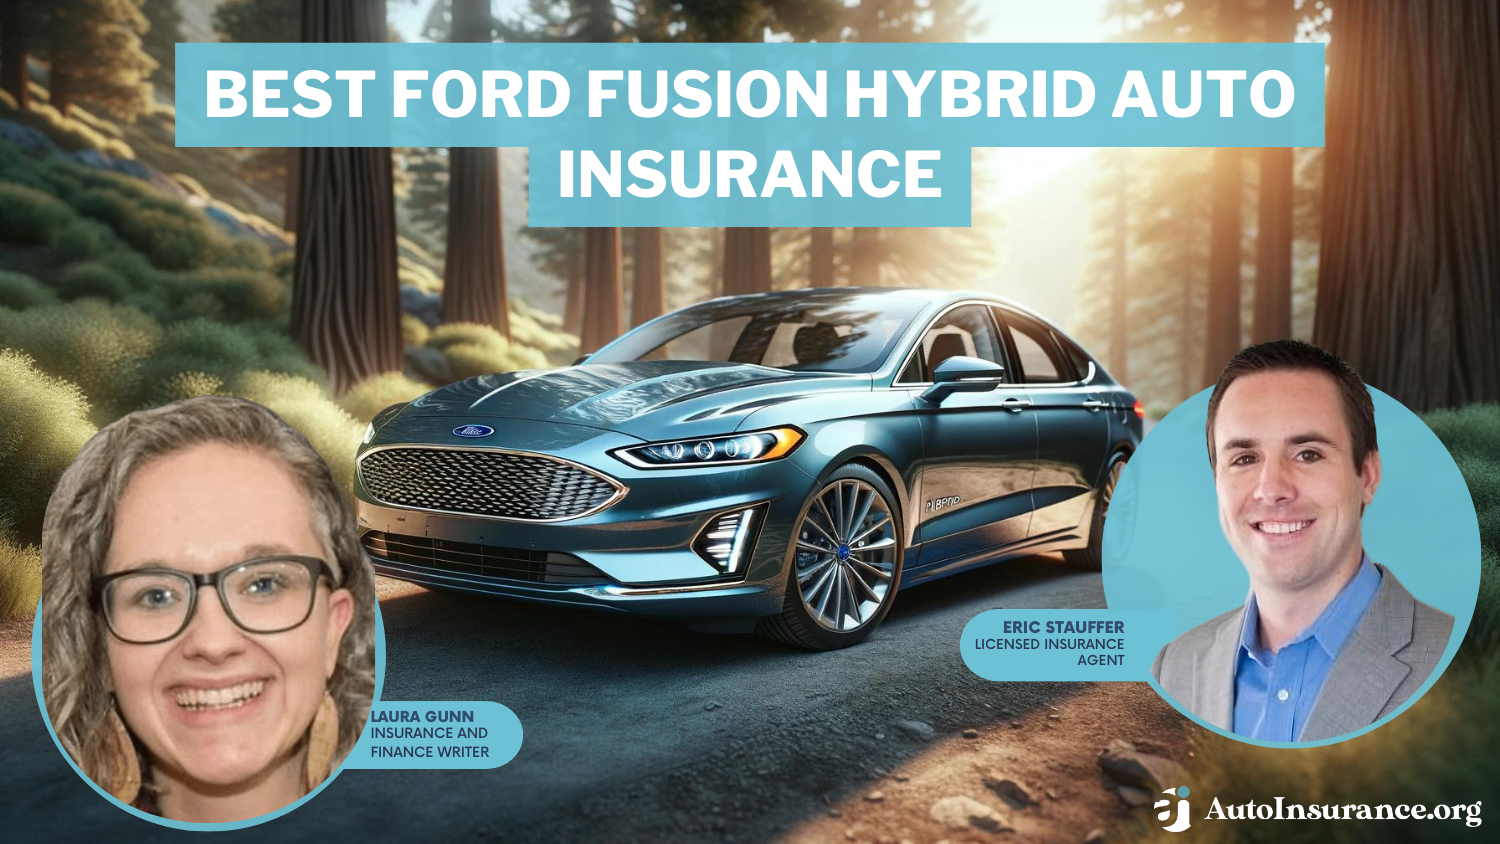 Best Ford Fusion Hybrid Auto Insurance: AAA, Amica, Erie